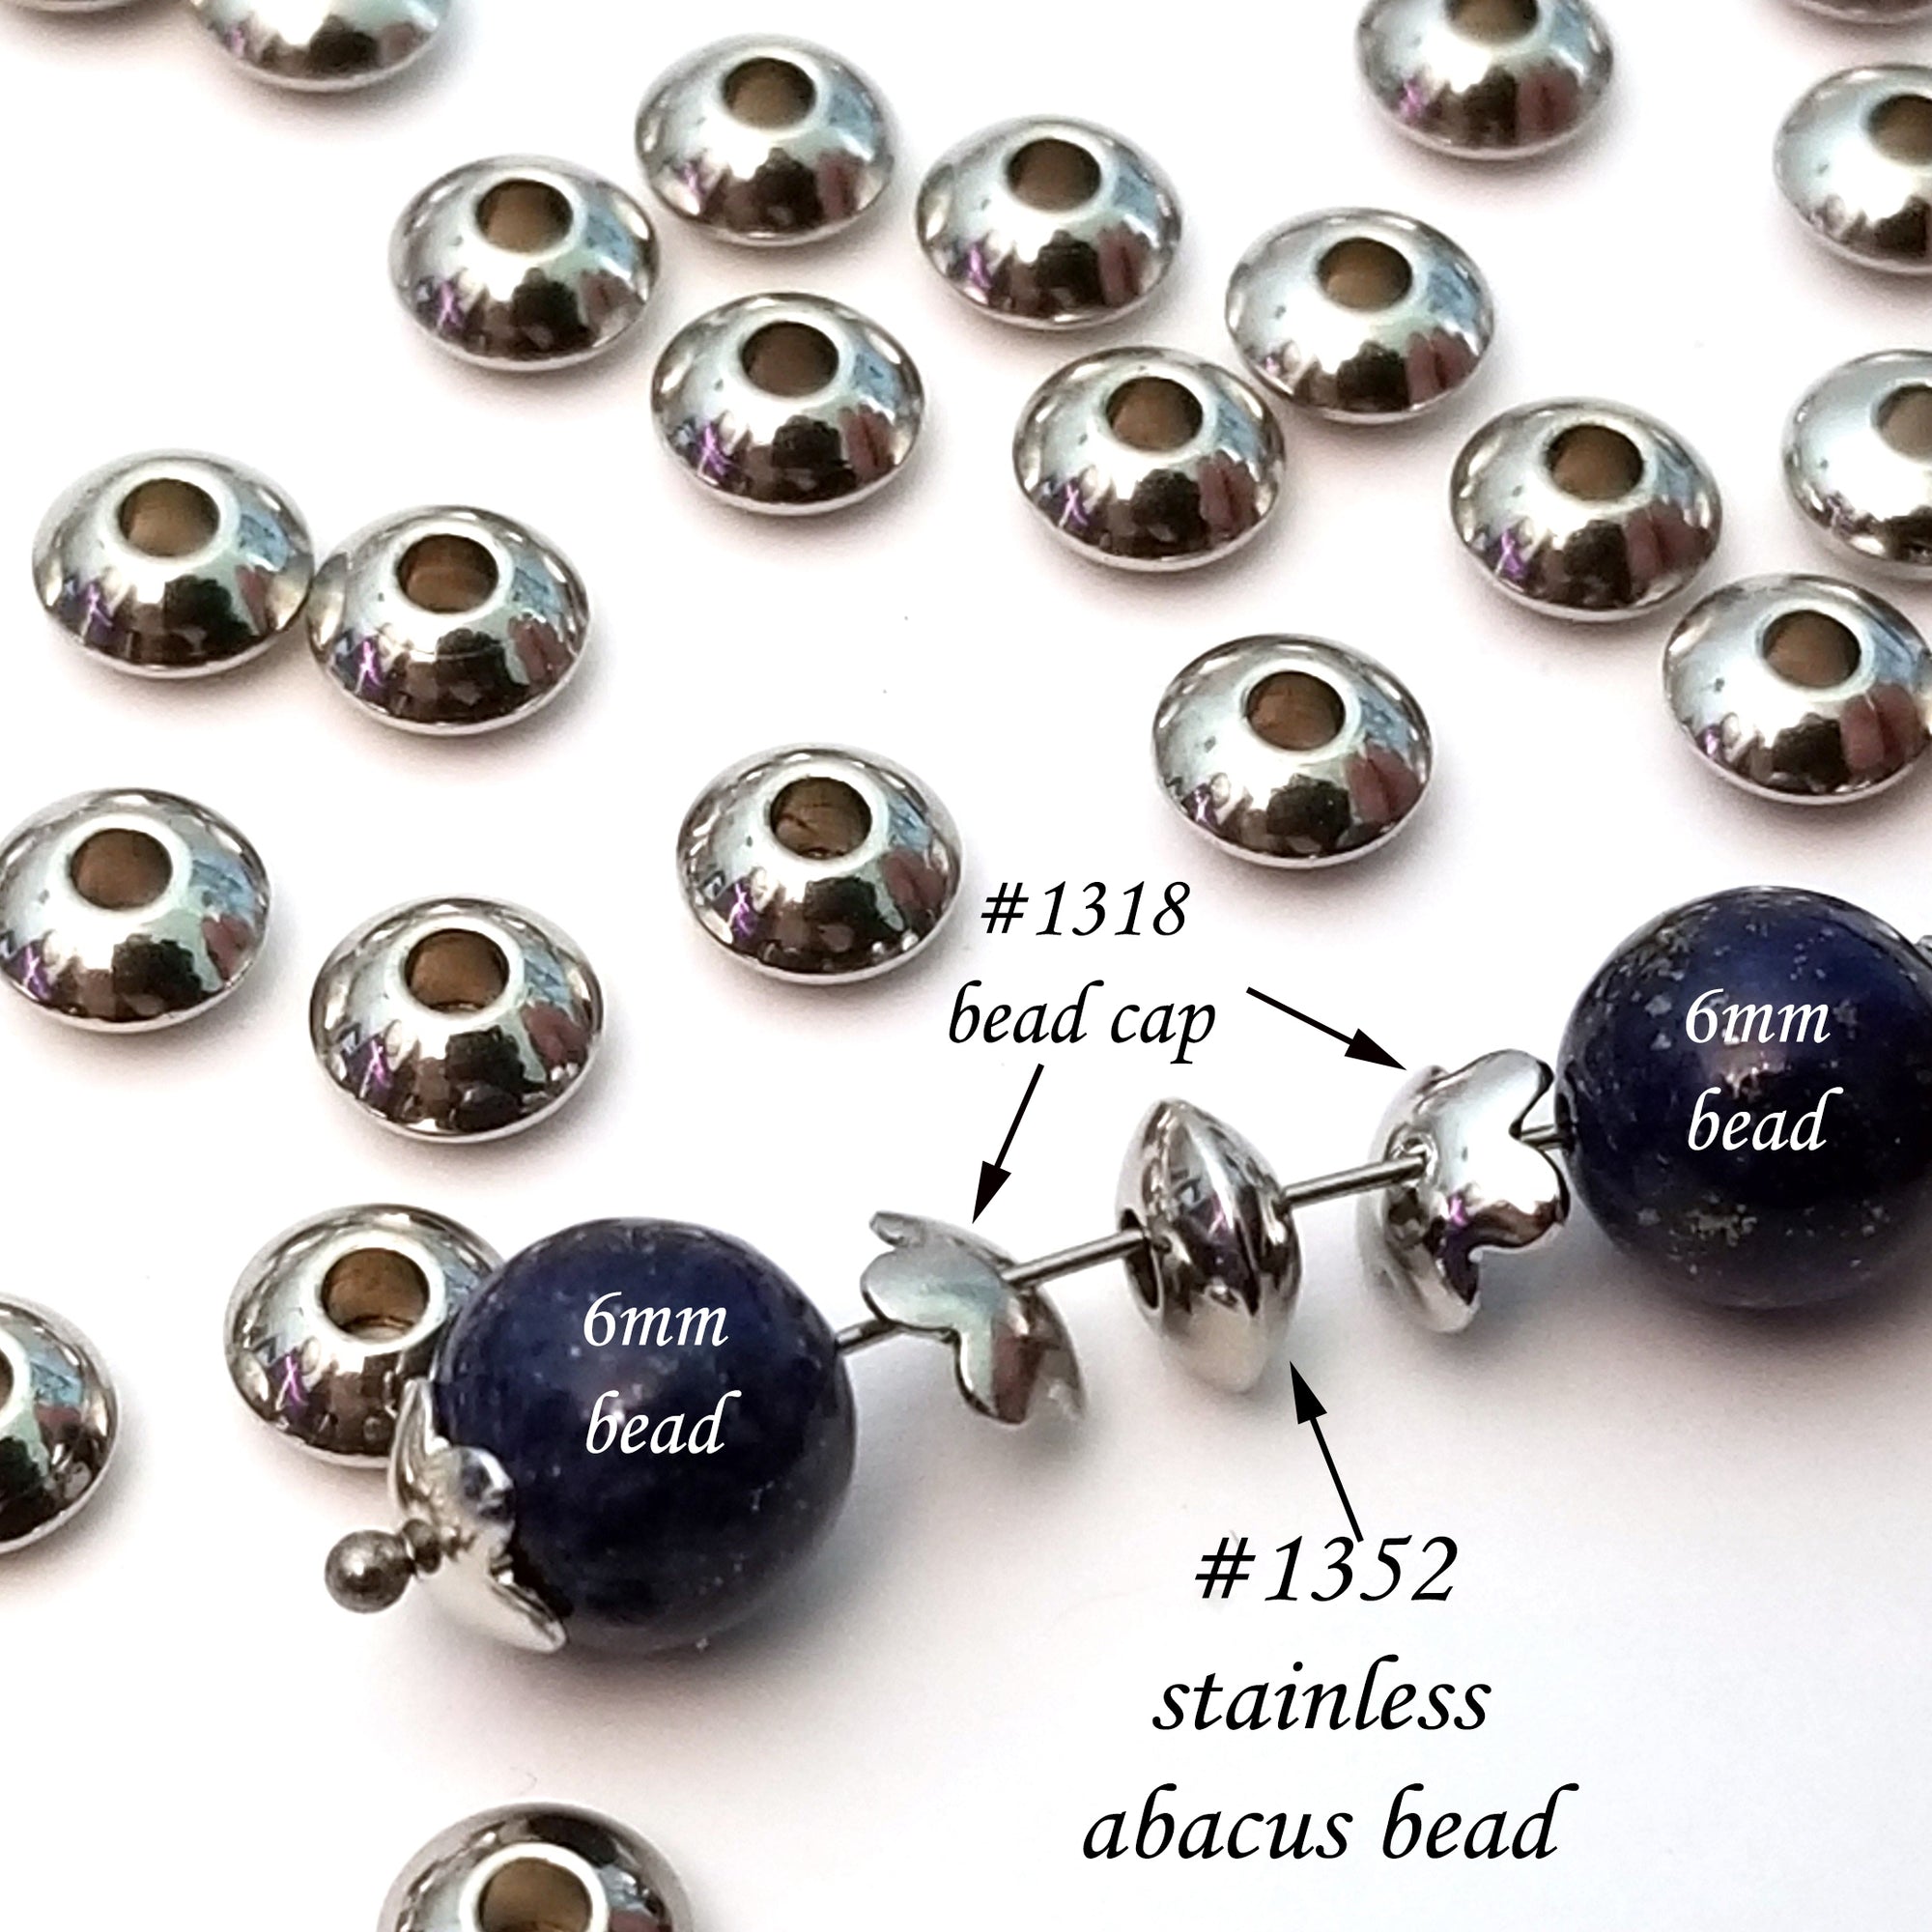 6mm Abacus Beads, Stainless Steel 6x3mm, 2mm Hole, Lot Size 200